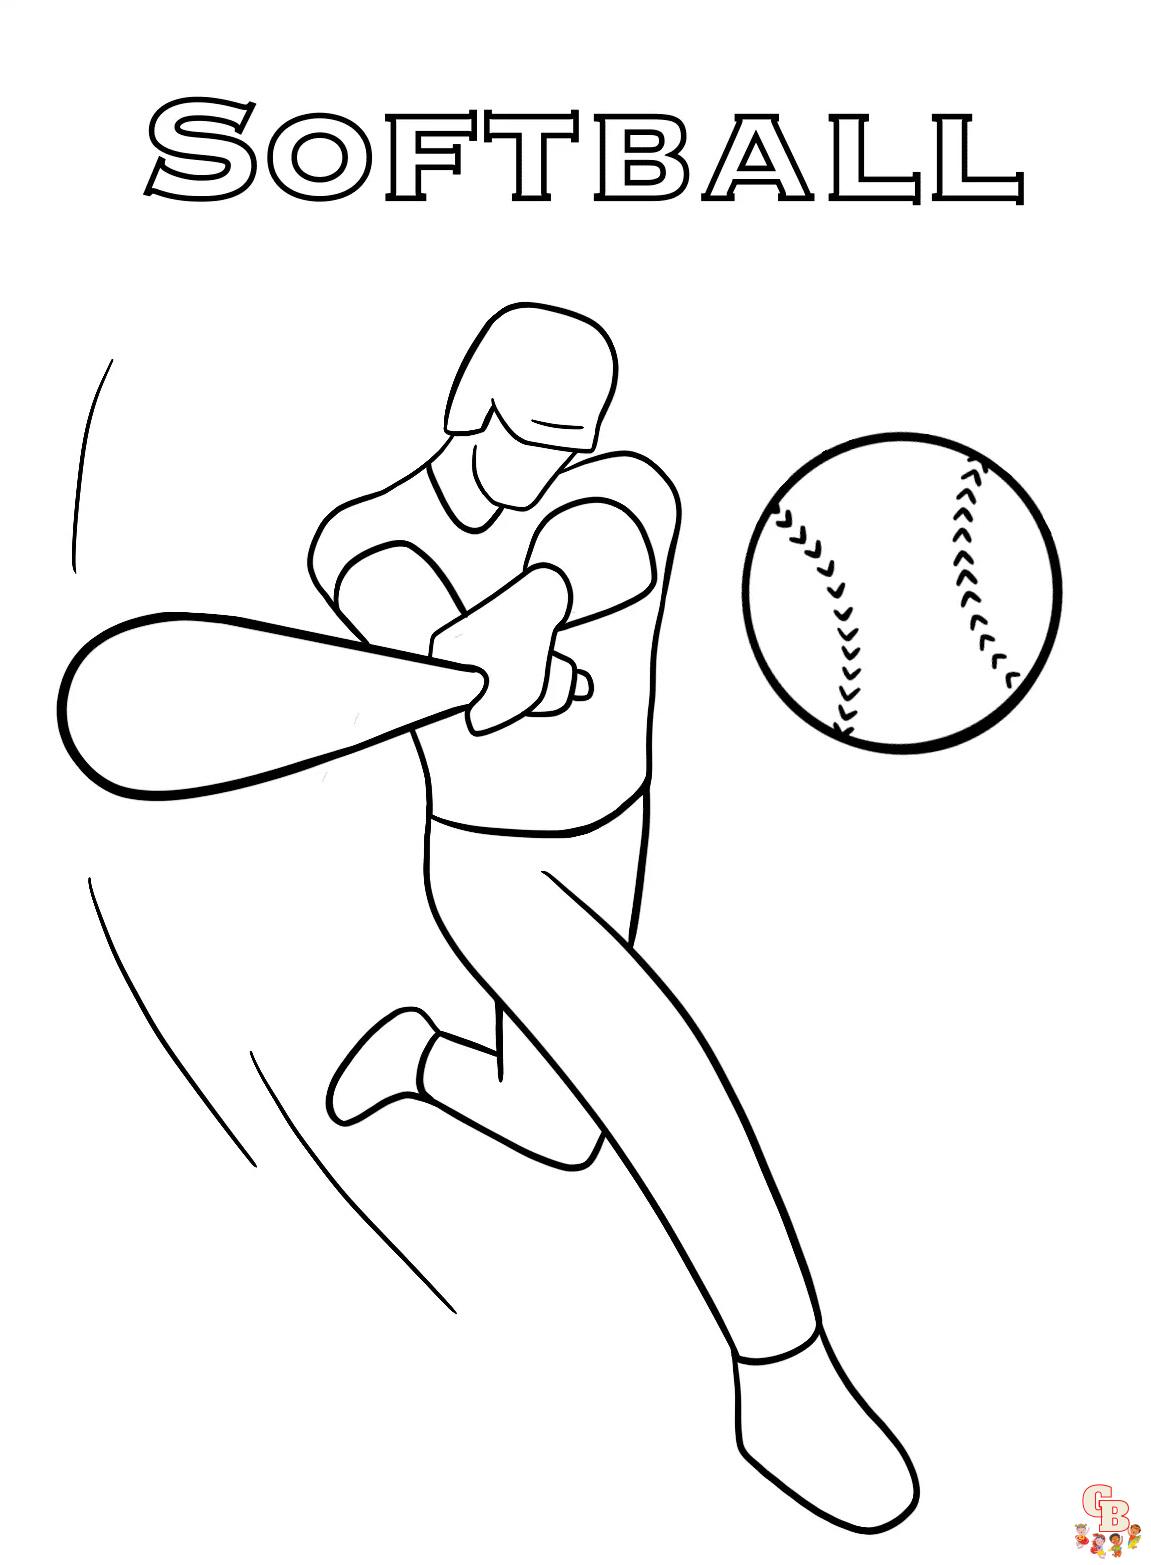 Softball Coloring Pages 1 1